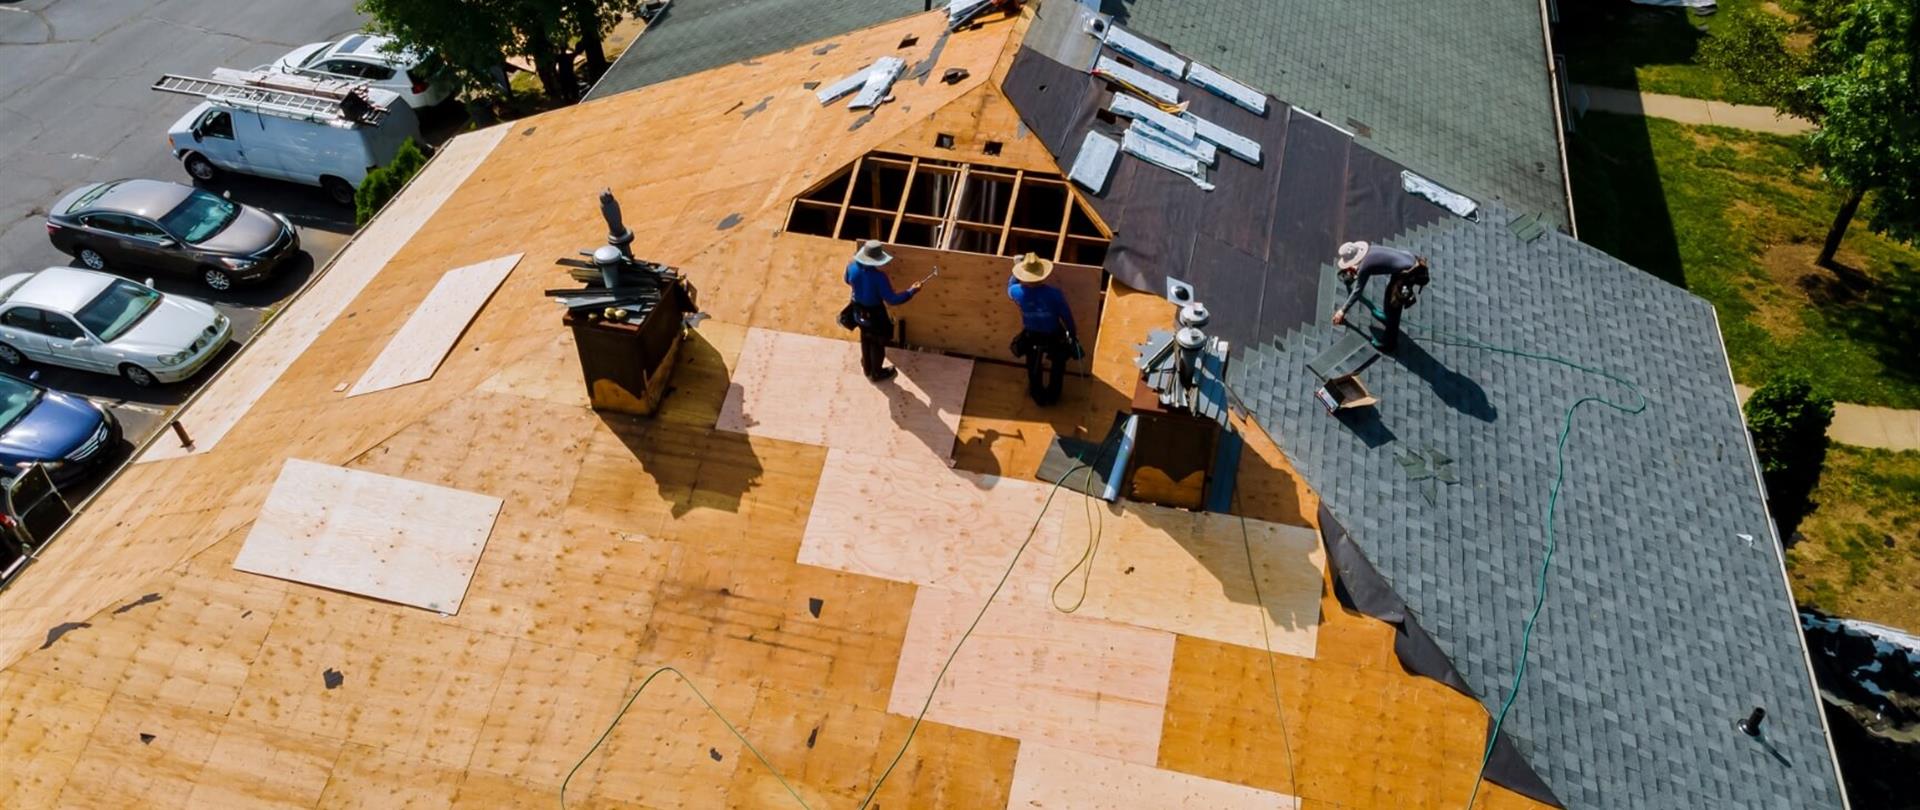 Professional Roofing Contractor & expert roofer serving Sunnyside WA and all nearby areas